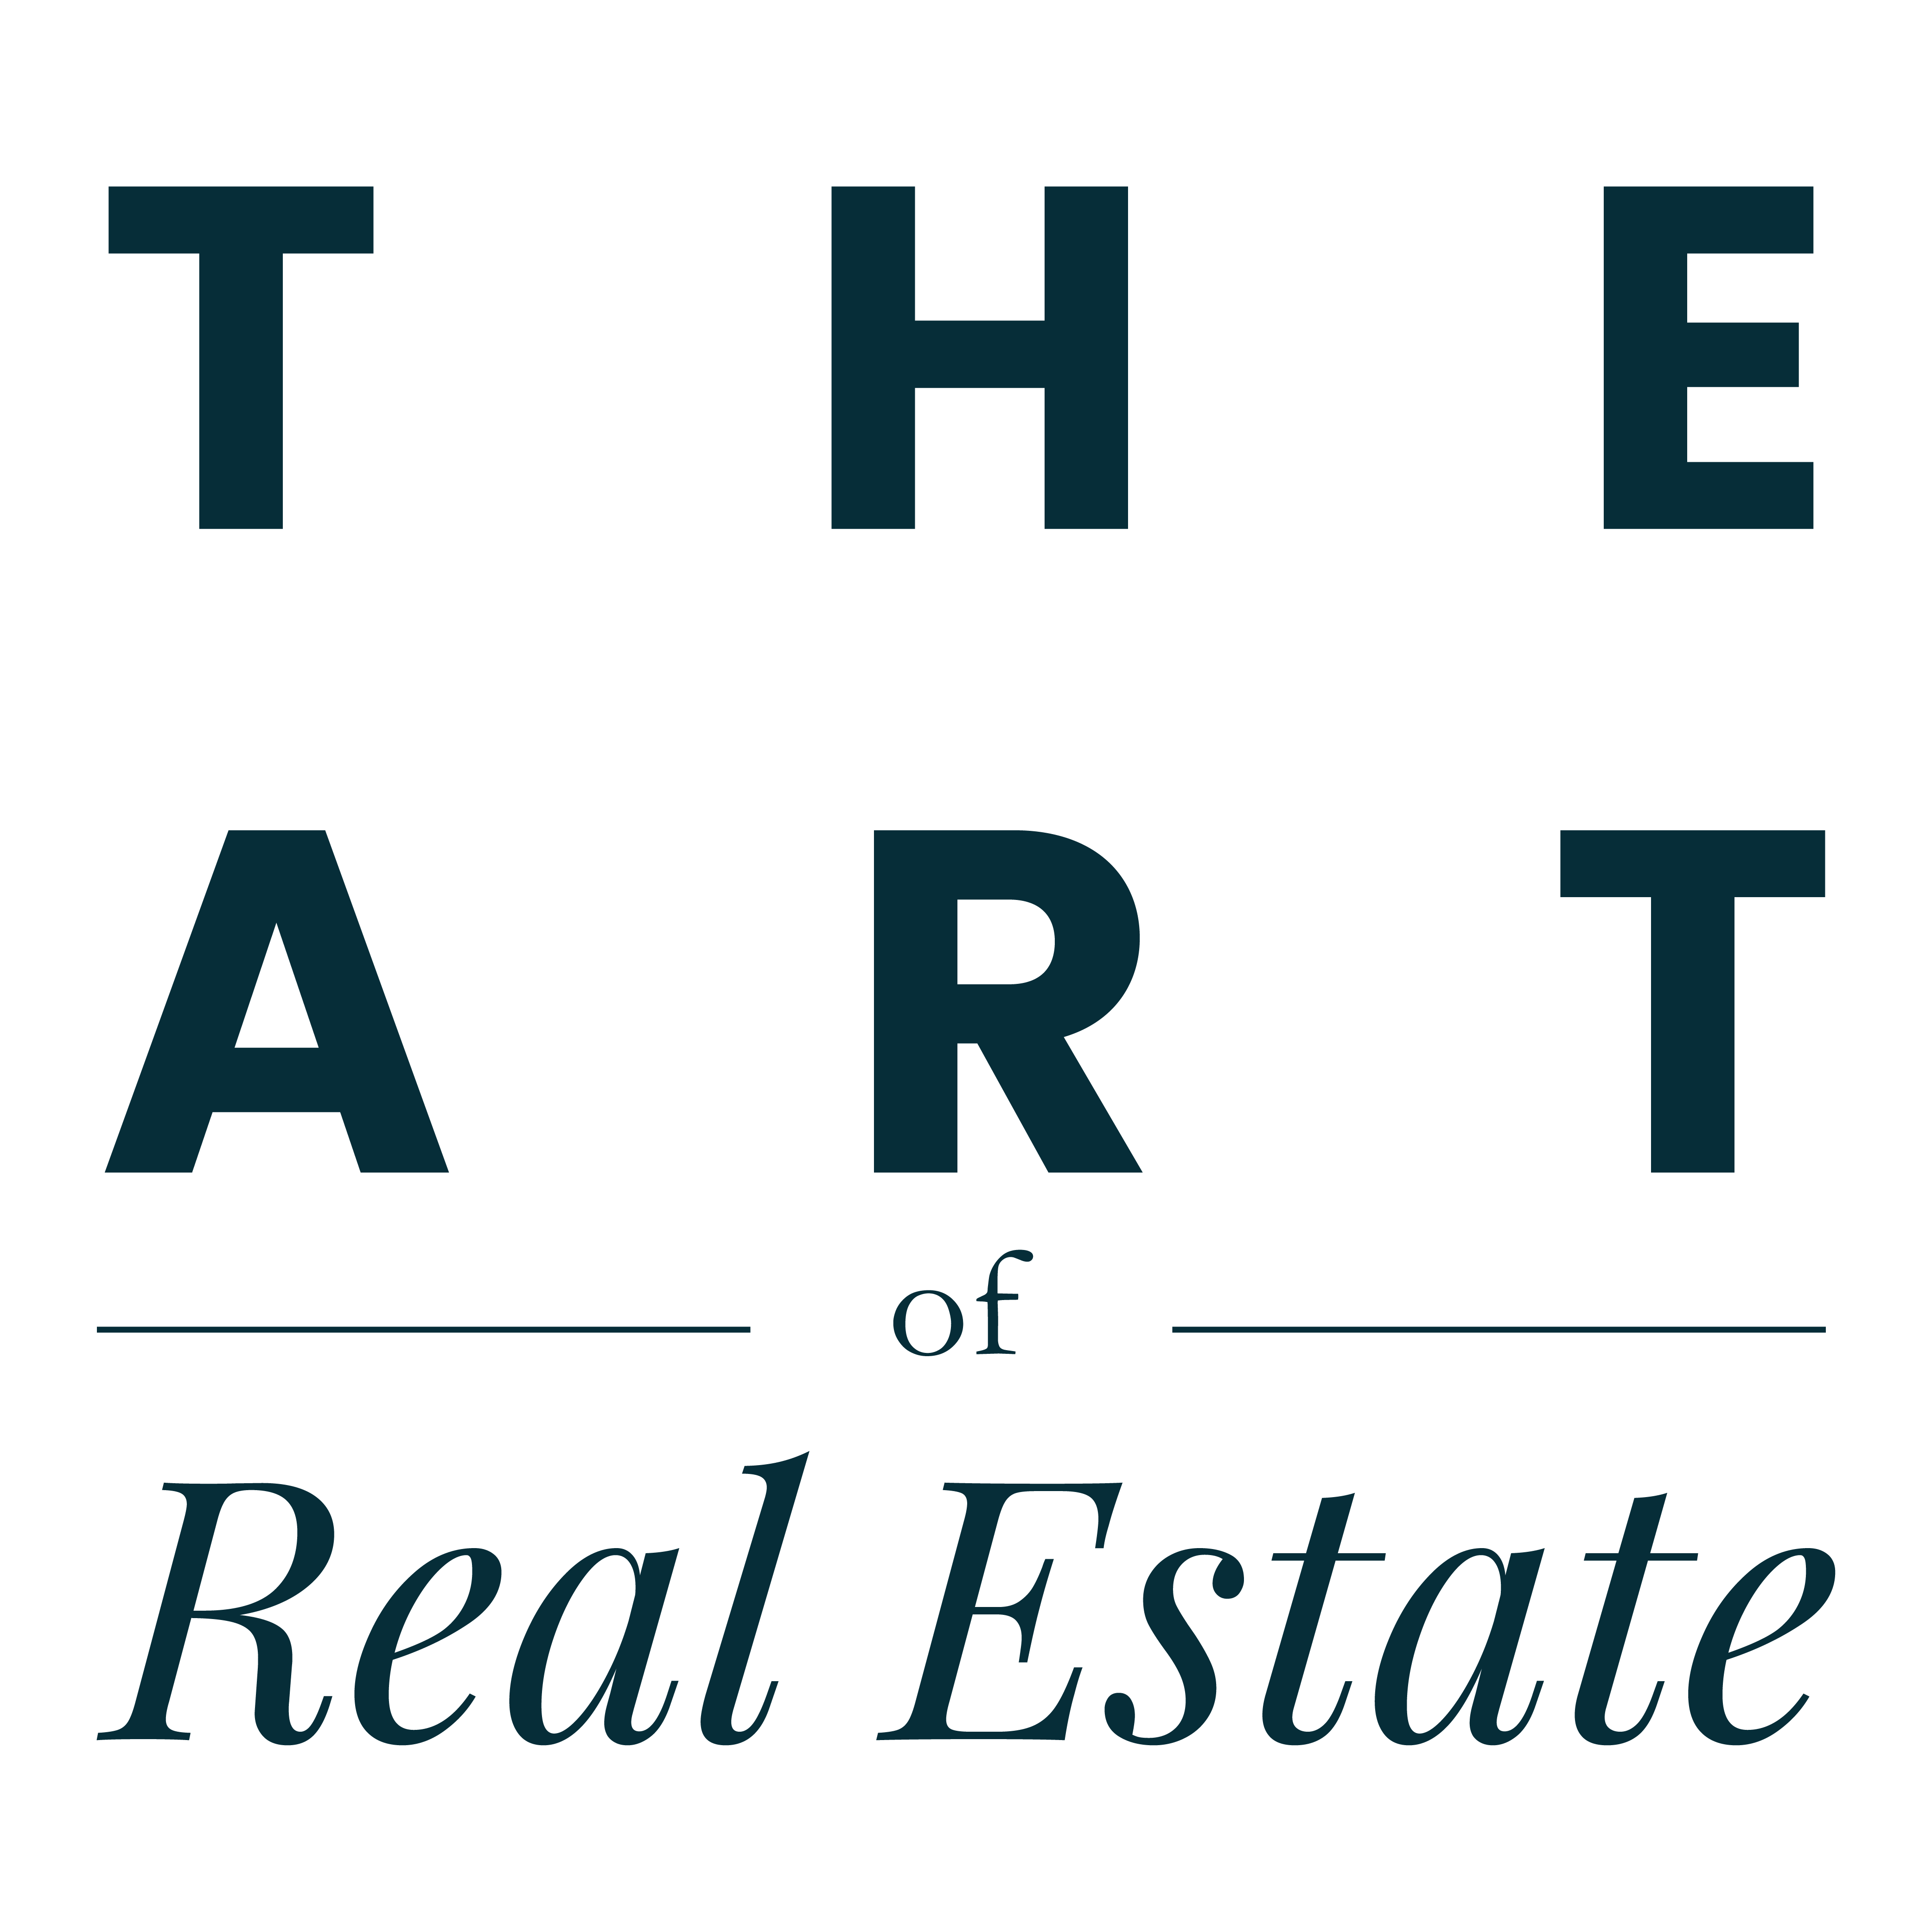 The ART of Real Estate